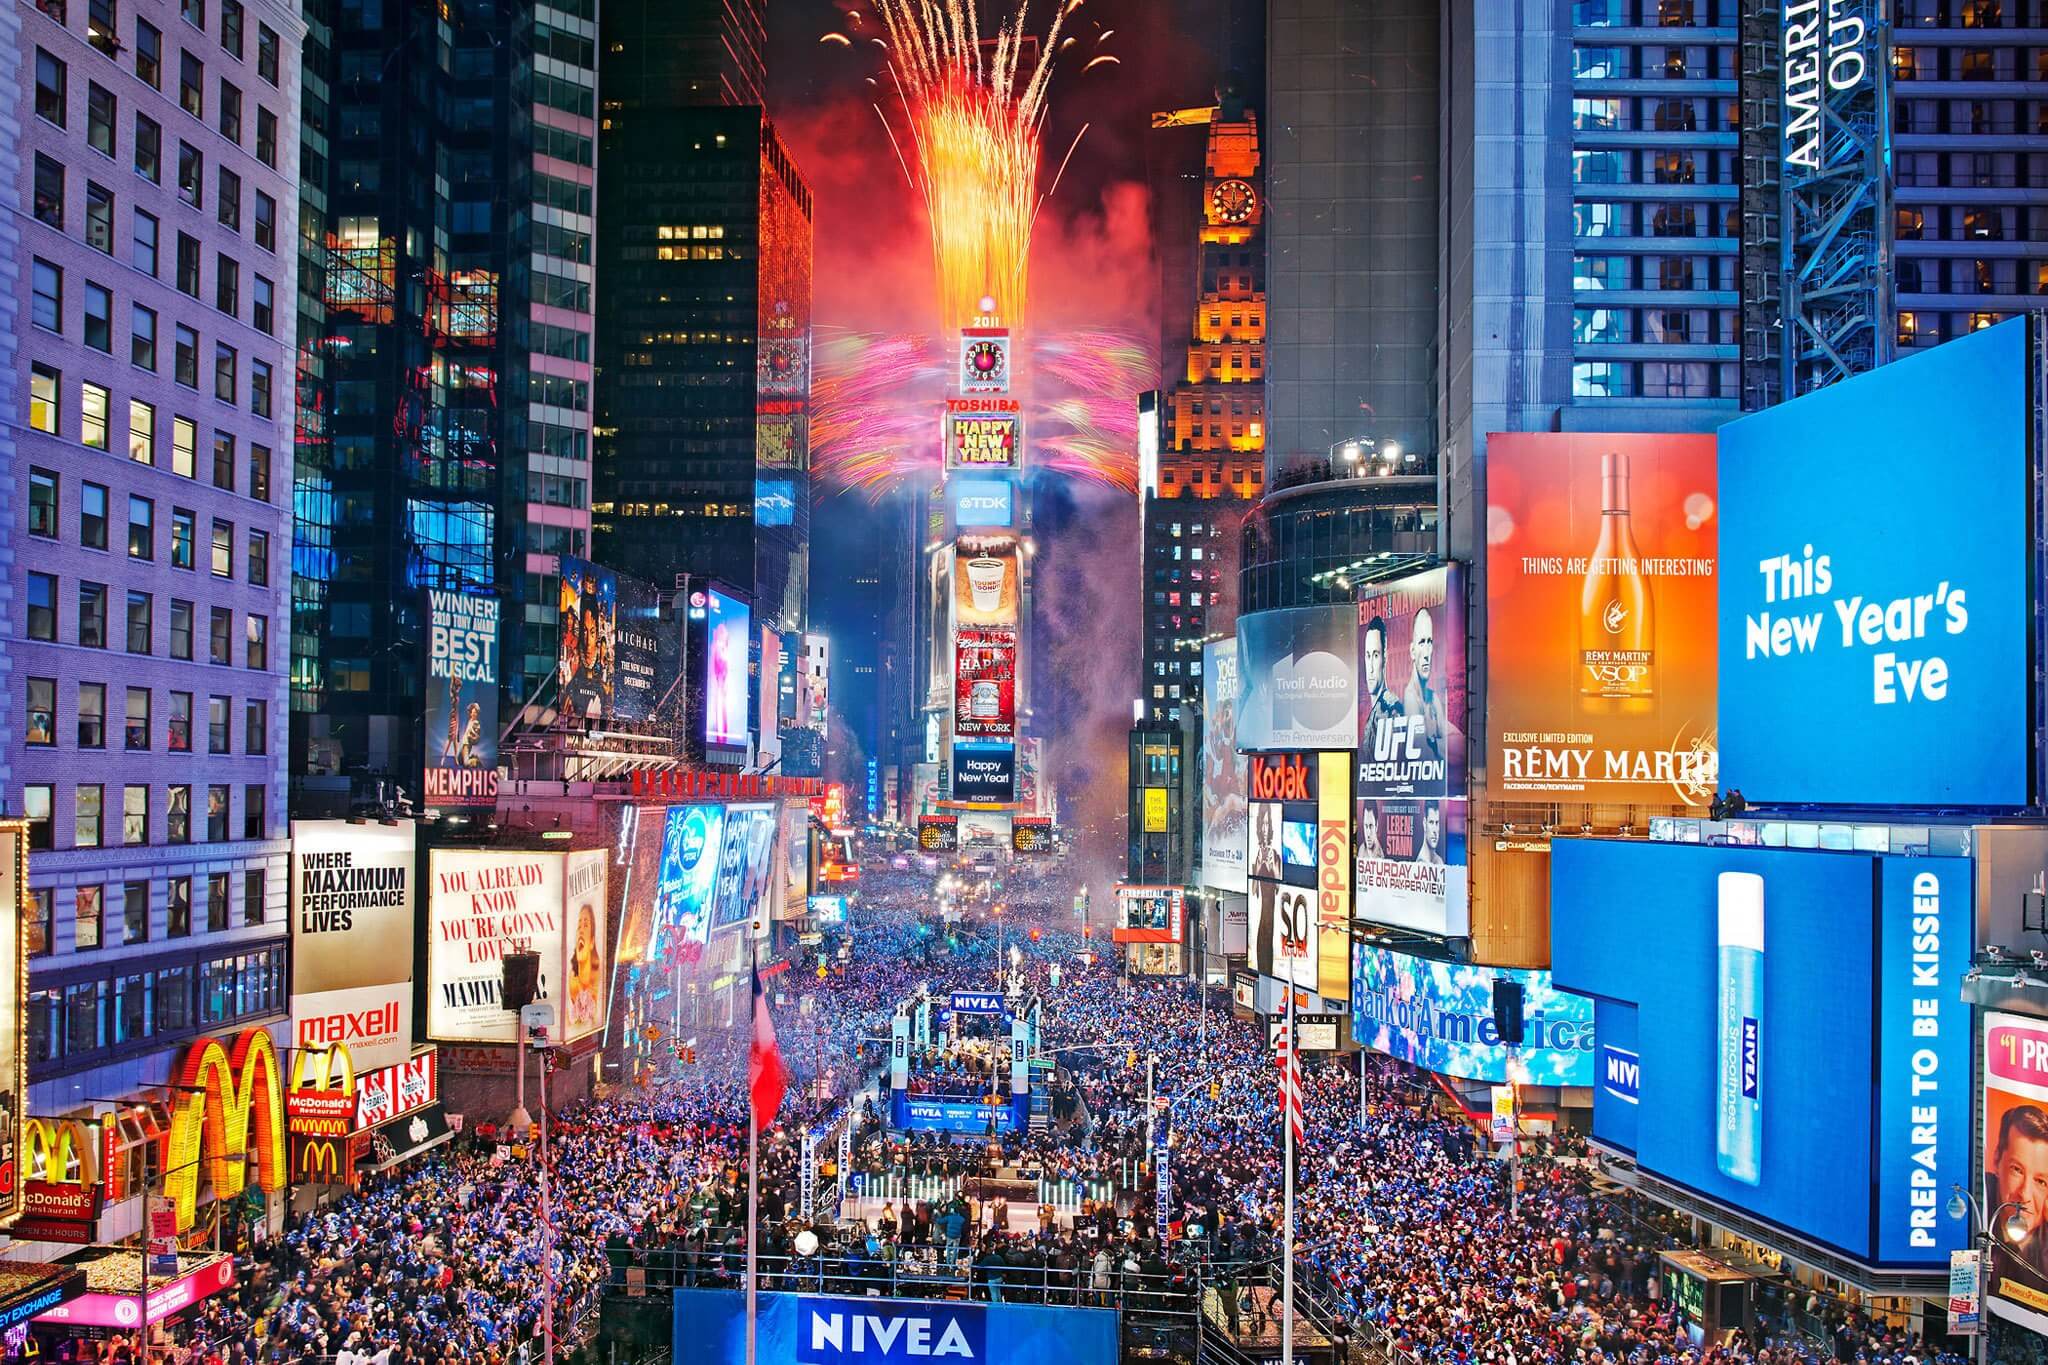 NYPD to deploy drone over Times Square New Year's Eve festivities